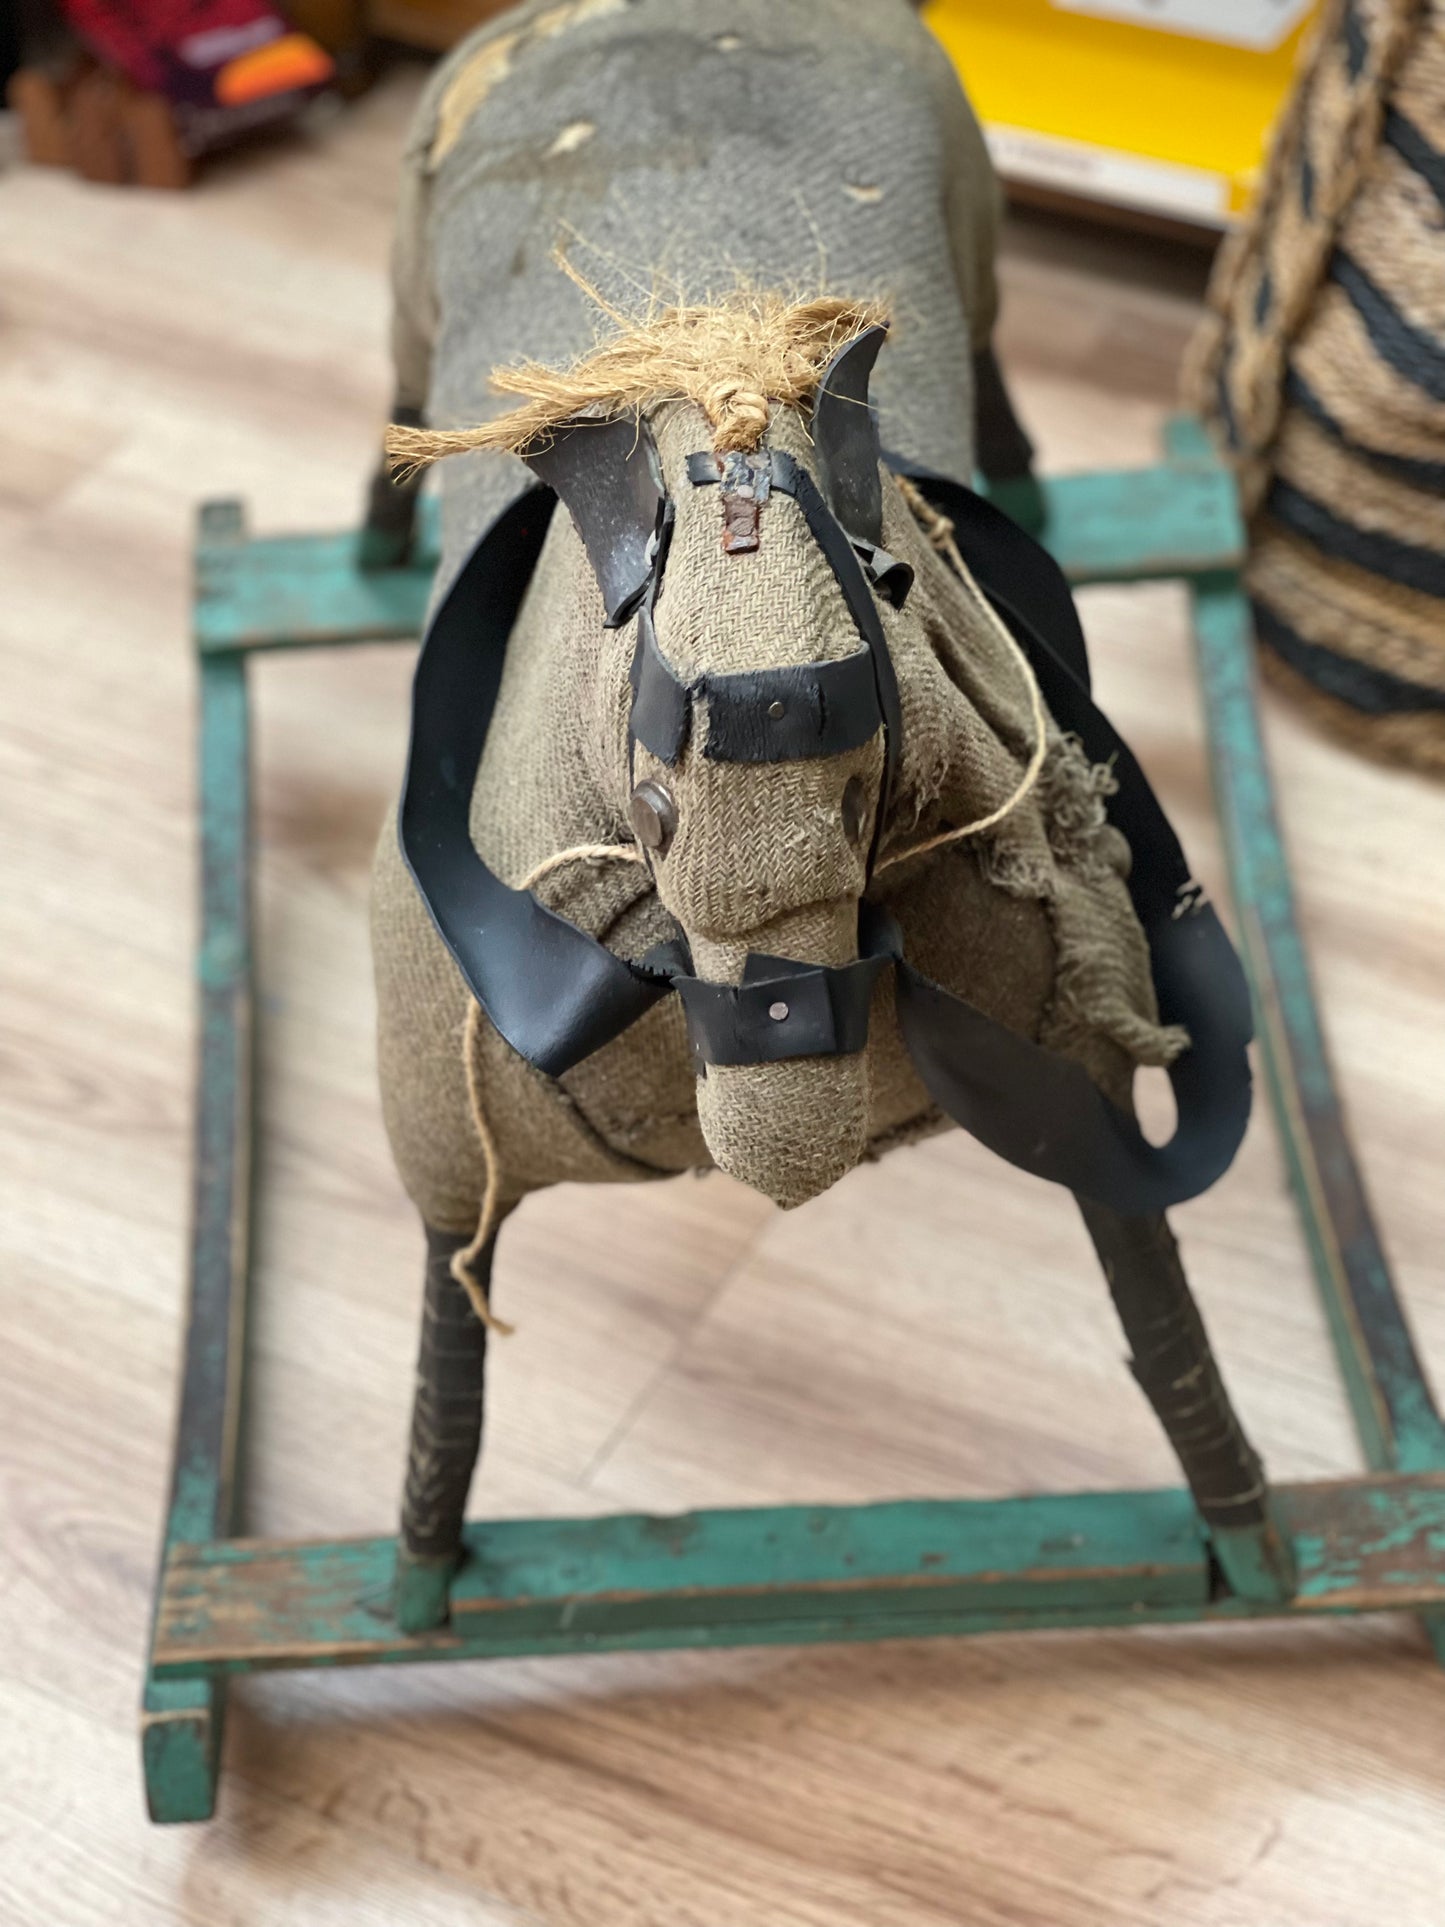 Vintage, Primitive, Hand-made, 1940s rocking horse - in store pick up only